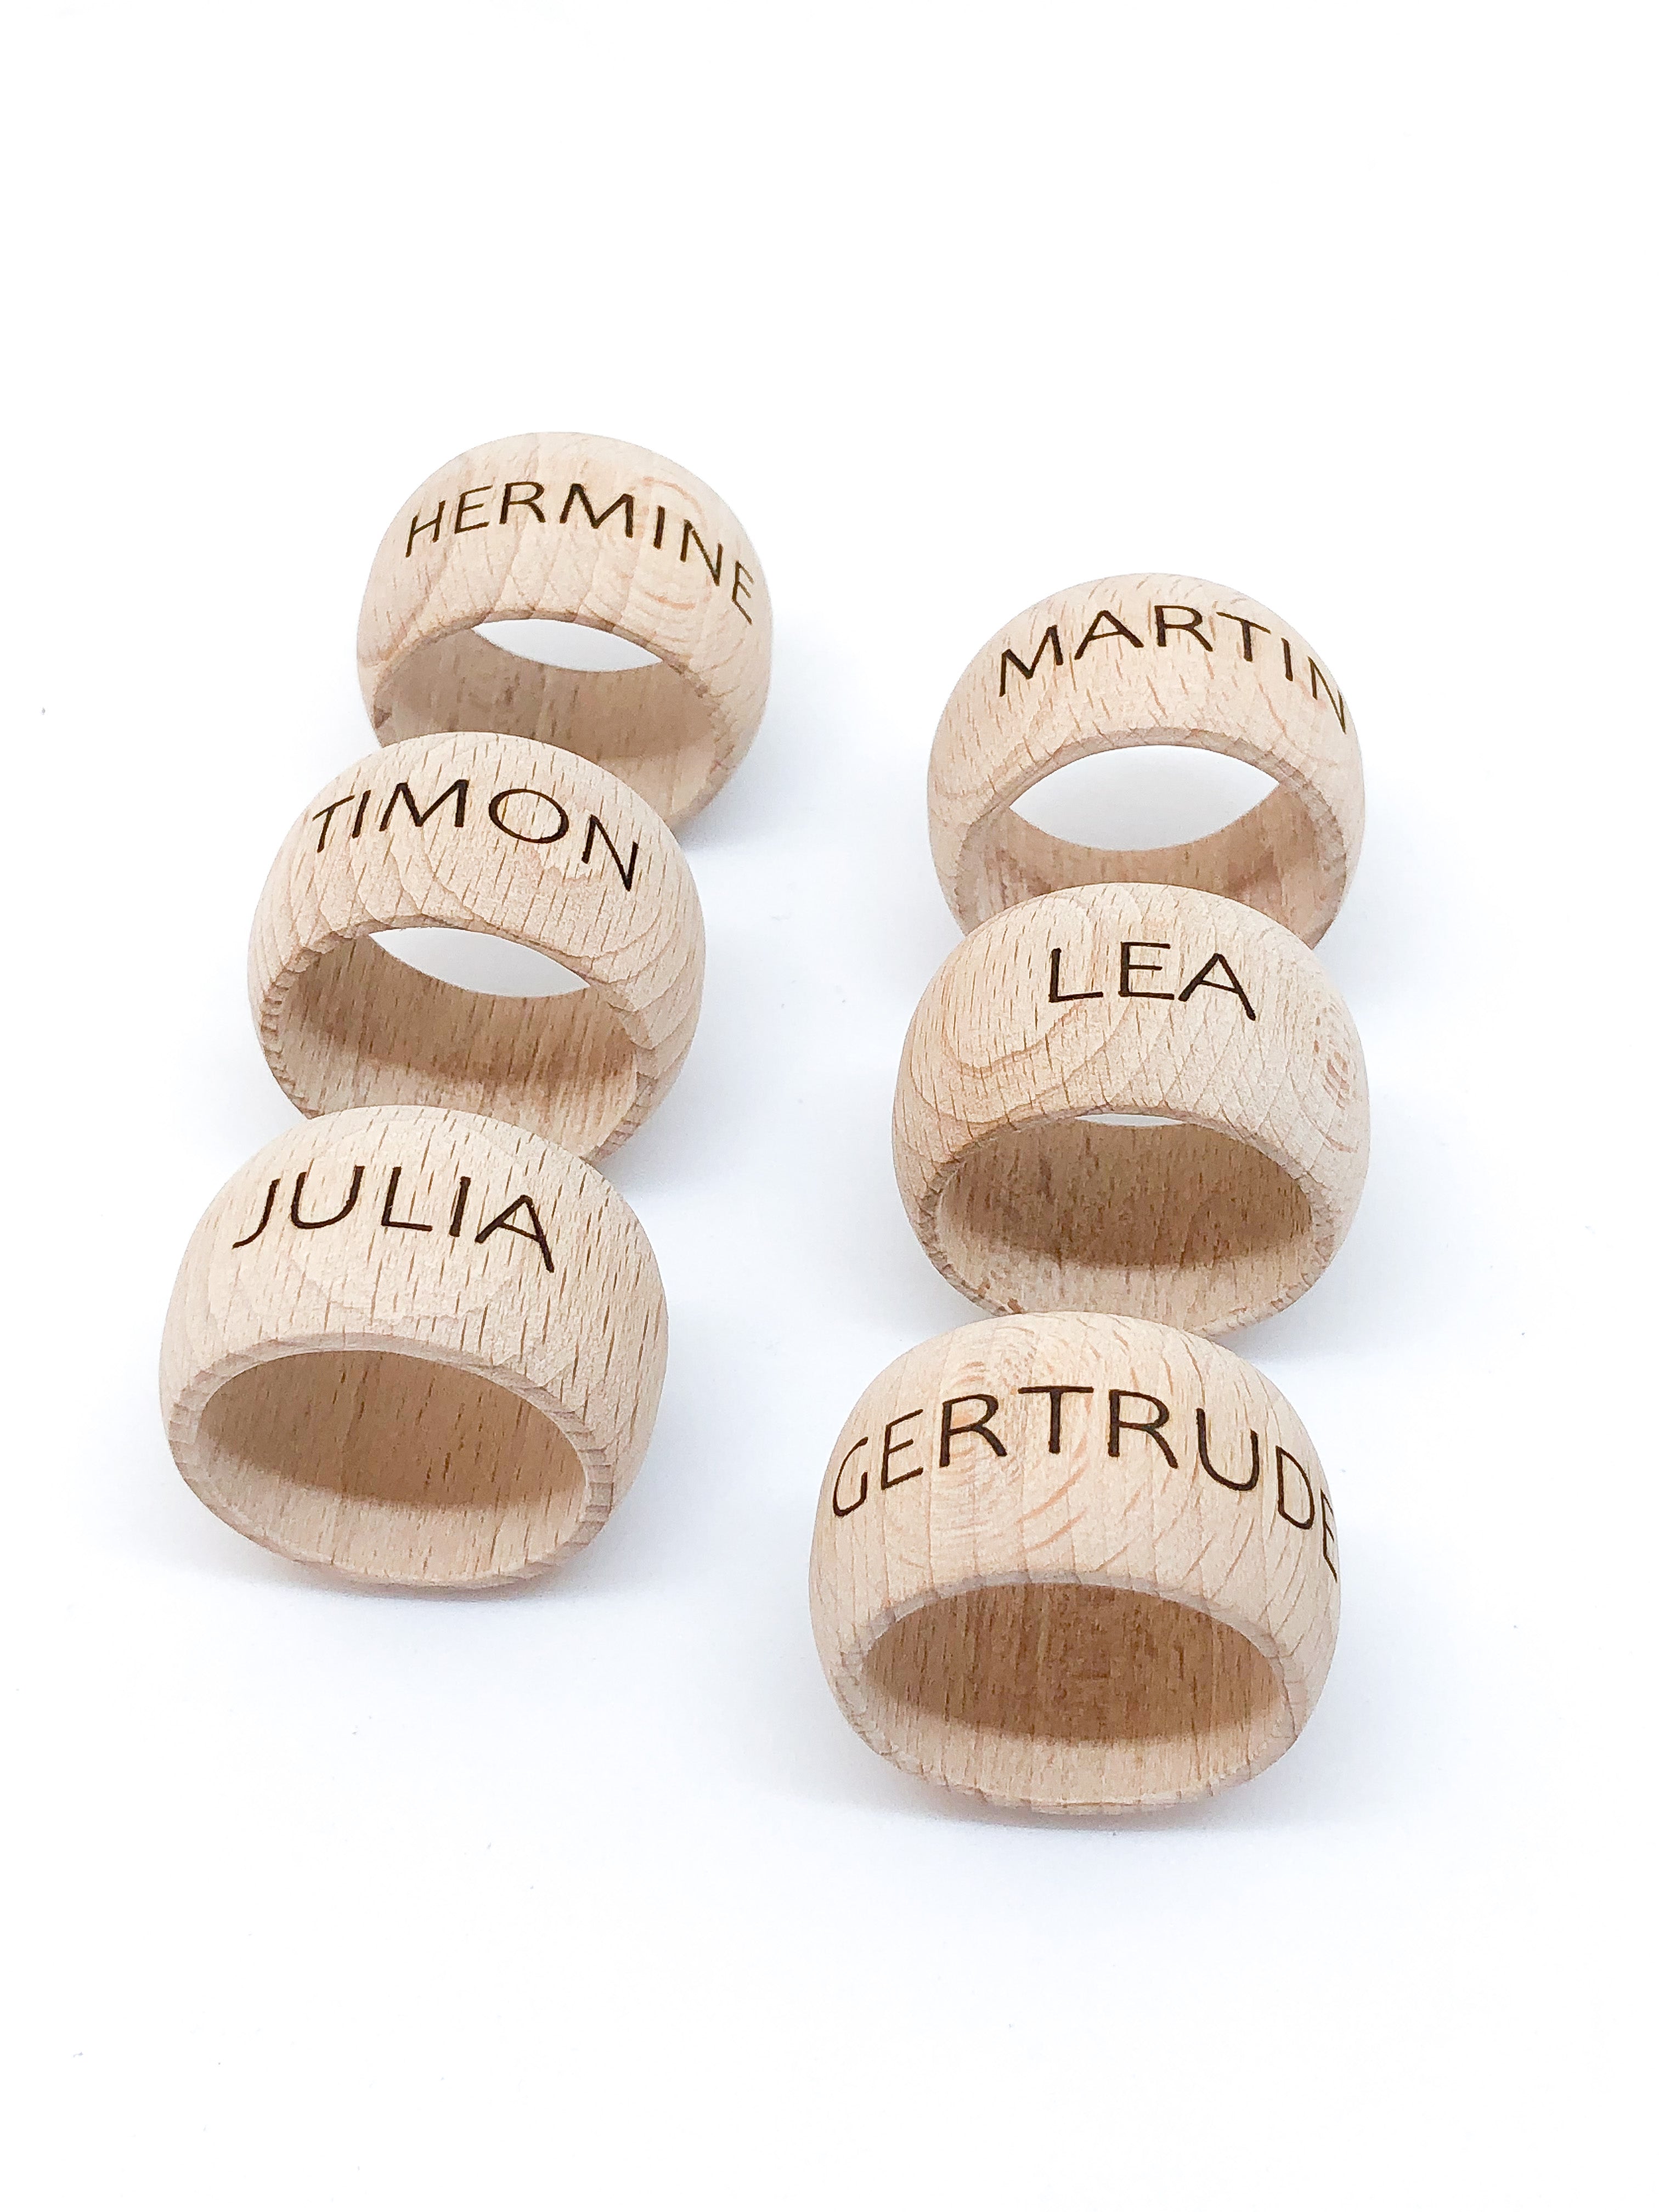 Personalized wooden napkin ring